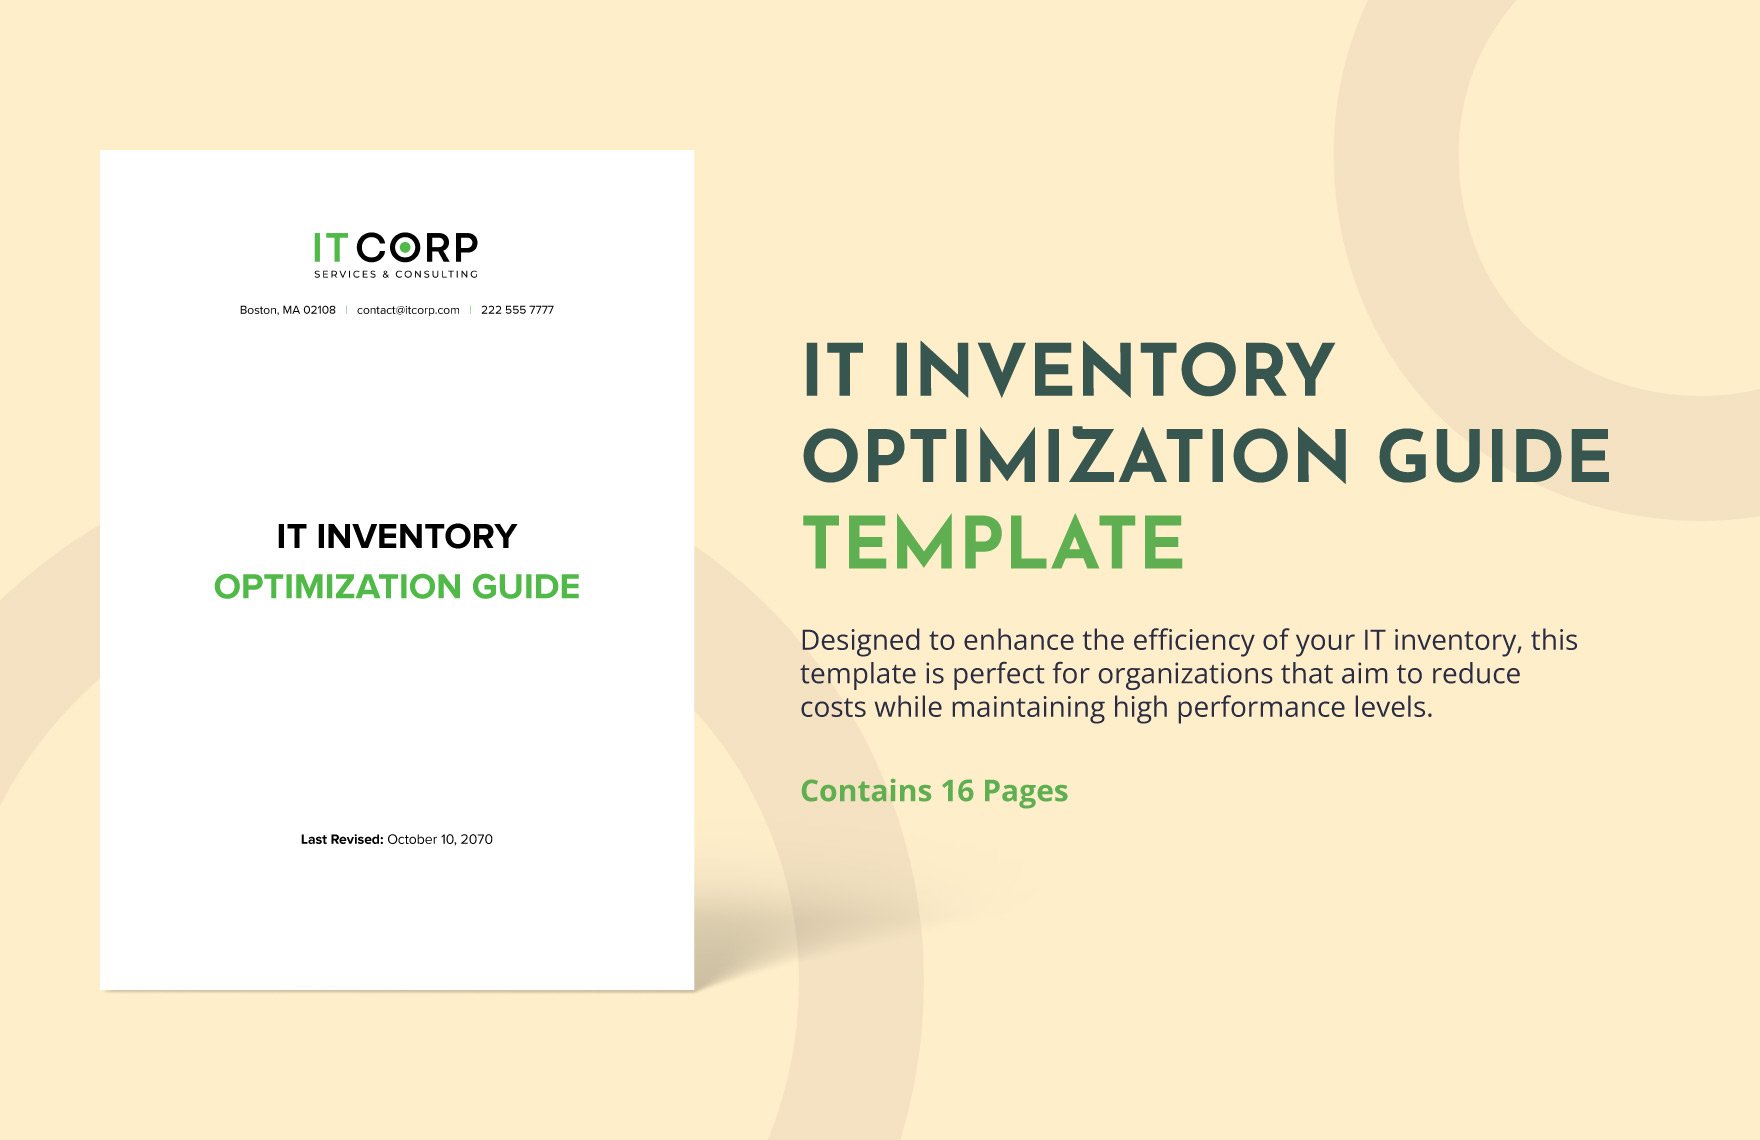 IT Inventory Optimization Guide Template